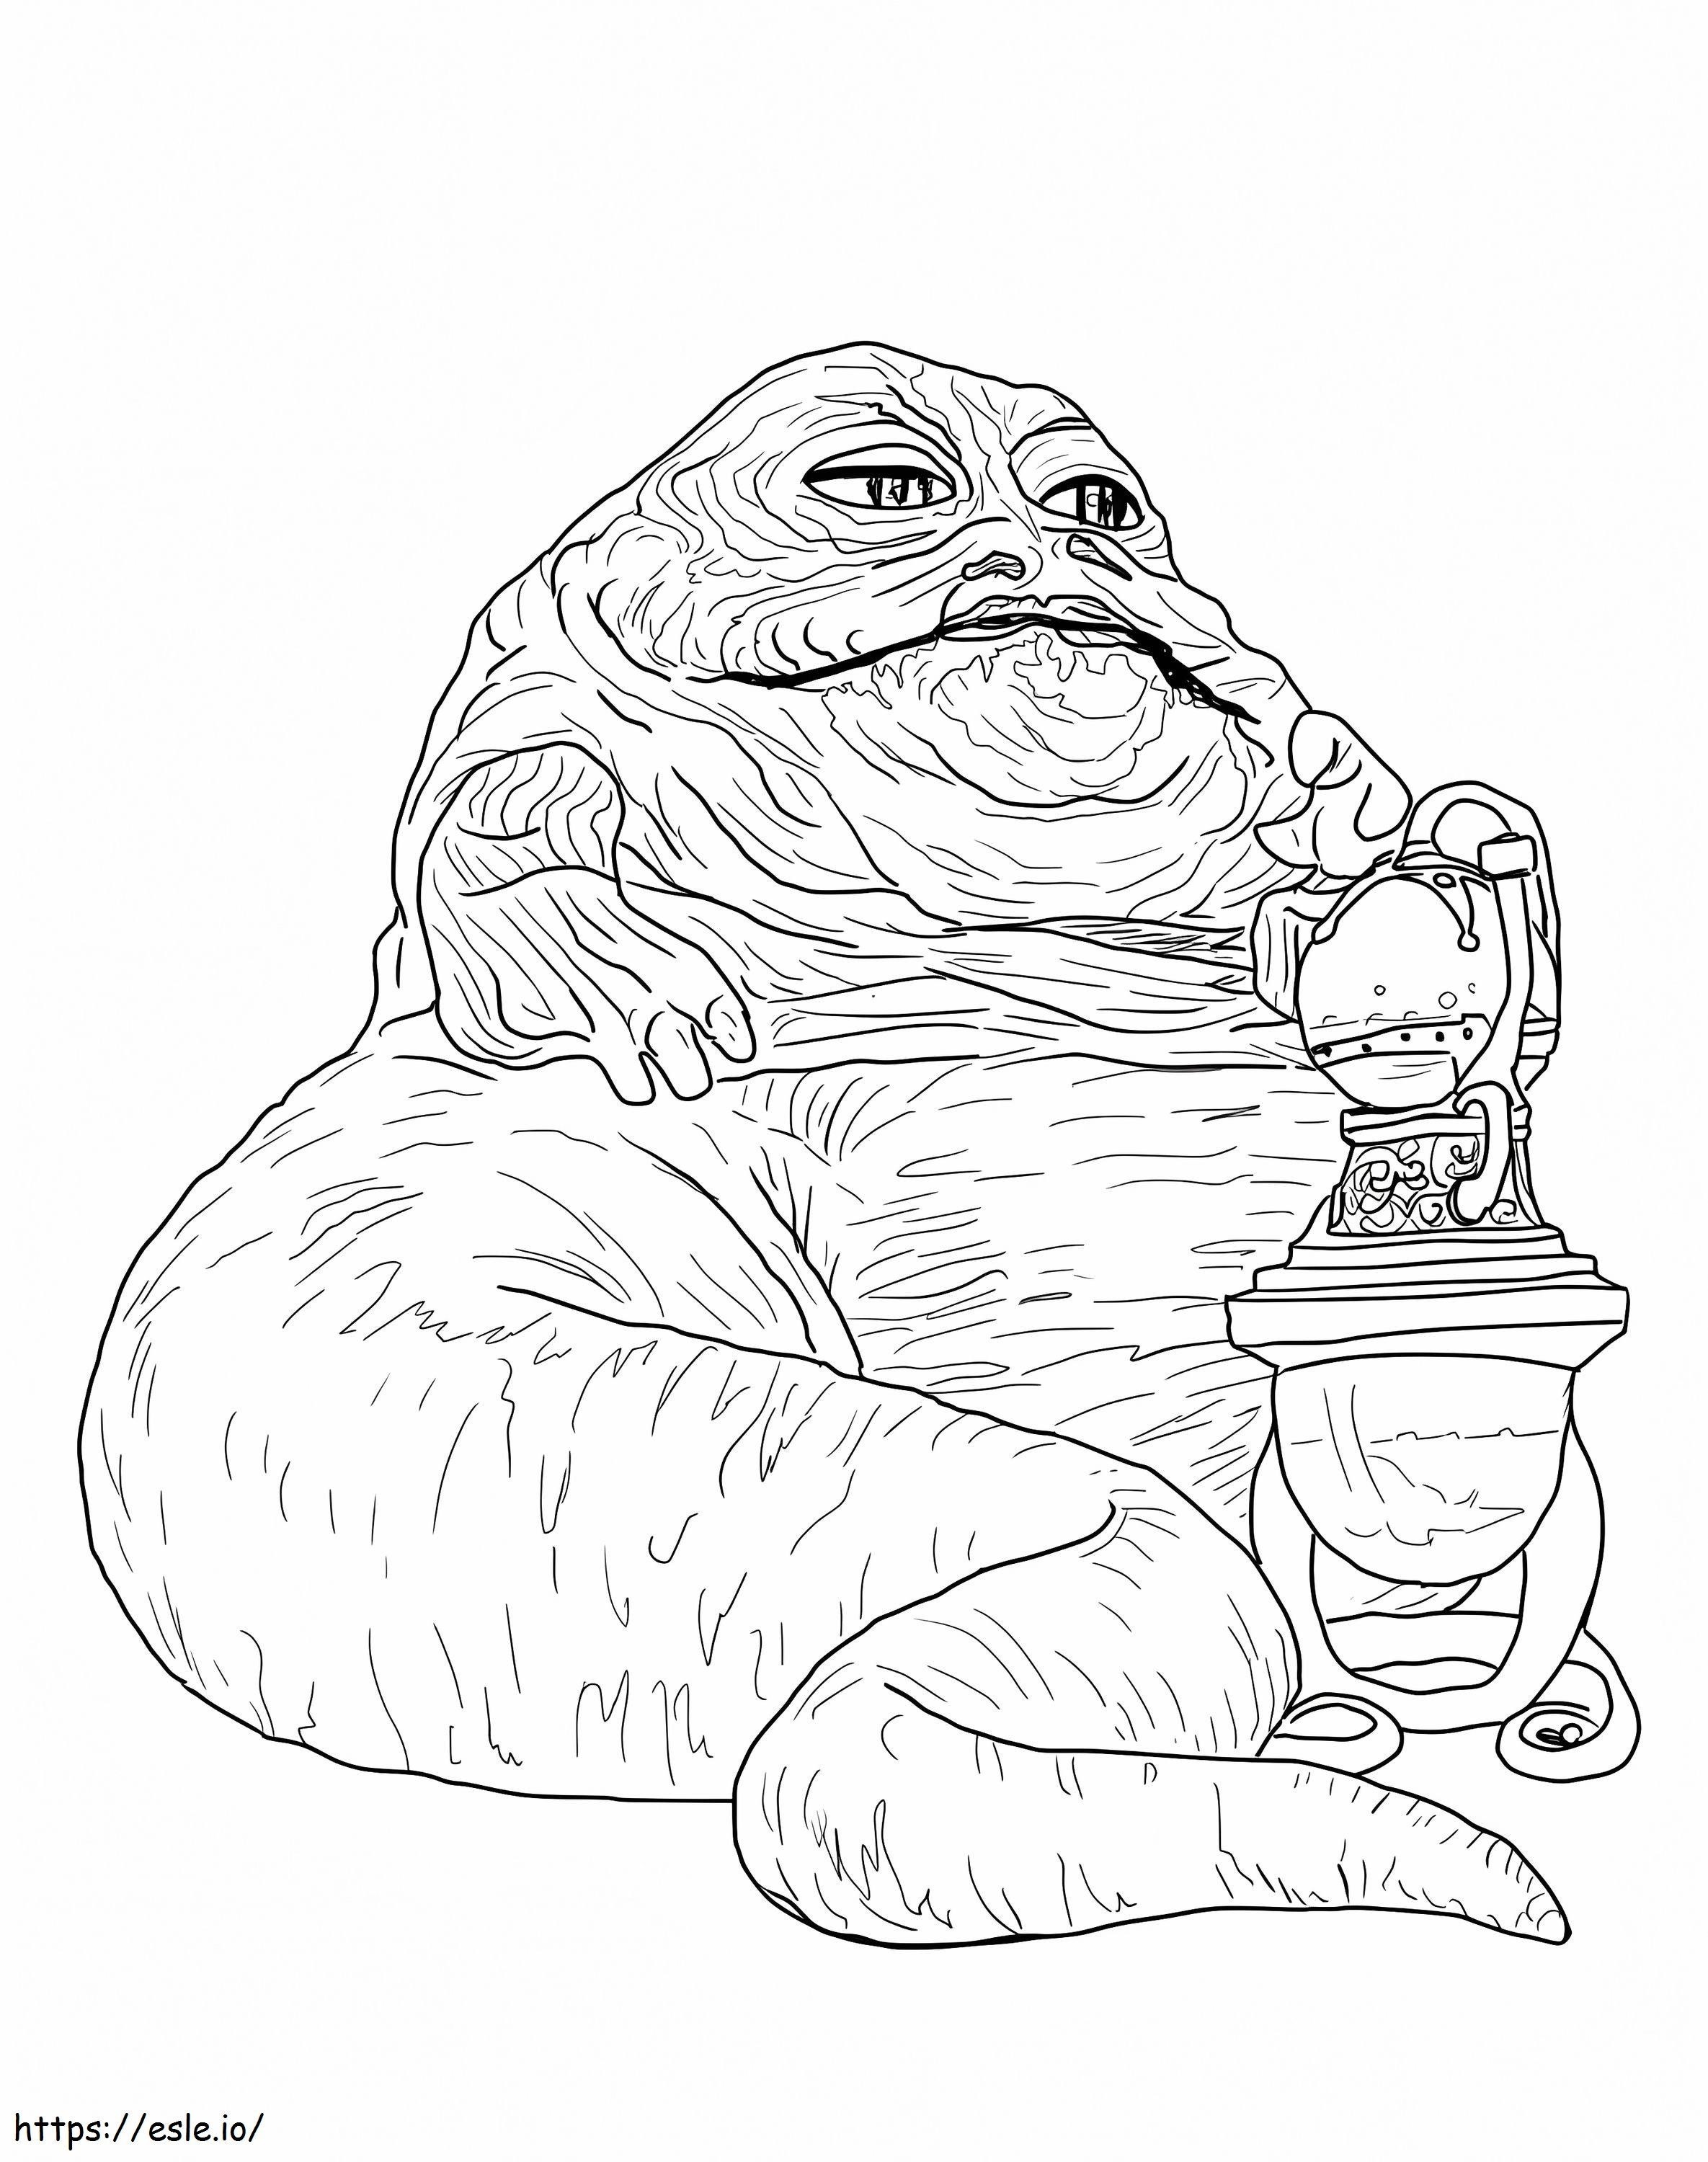 1583746161 Jabba The Hutt coloring page